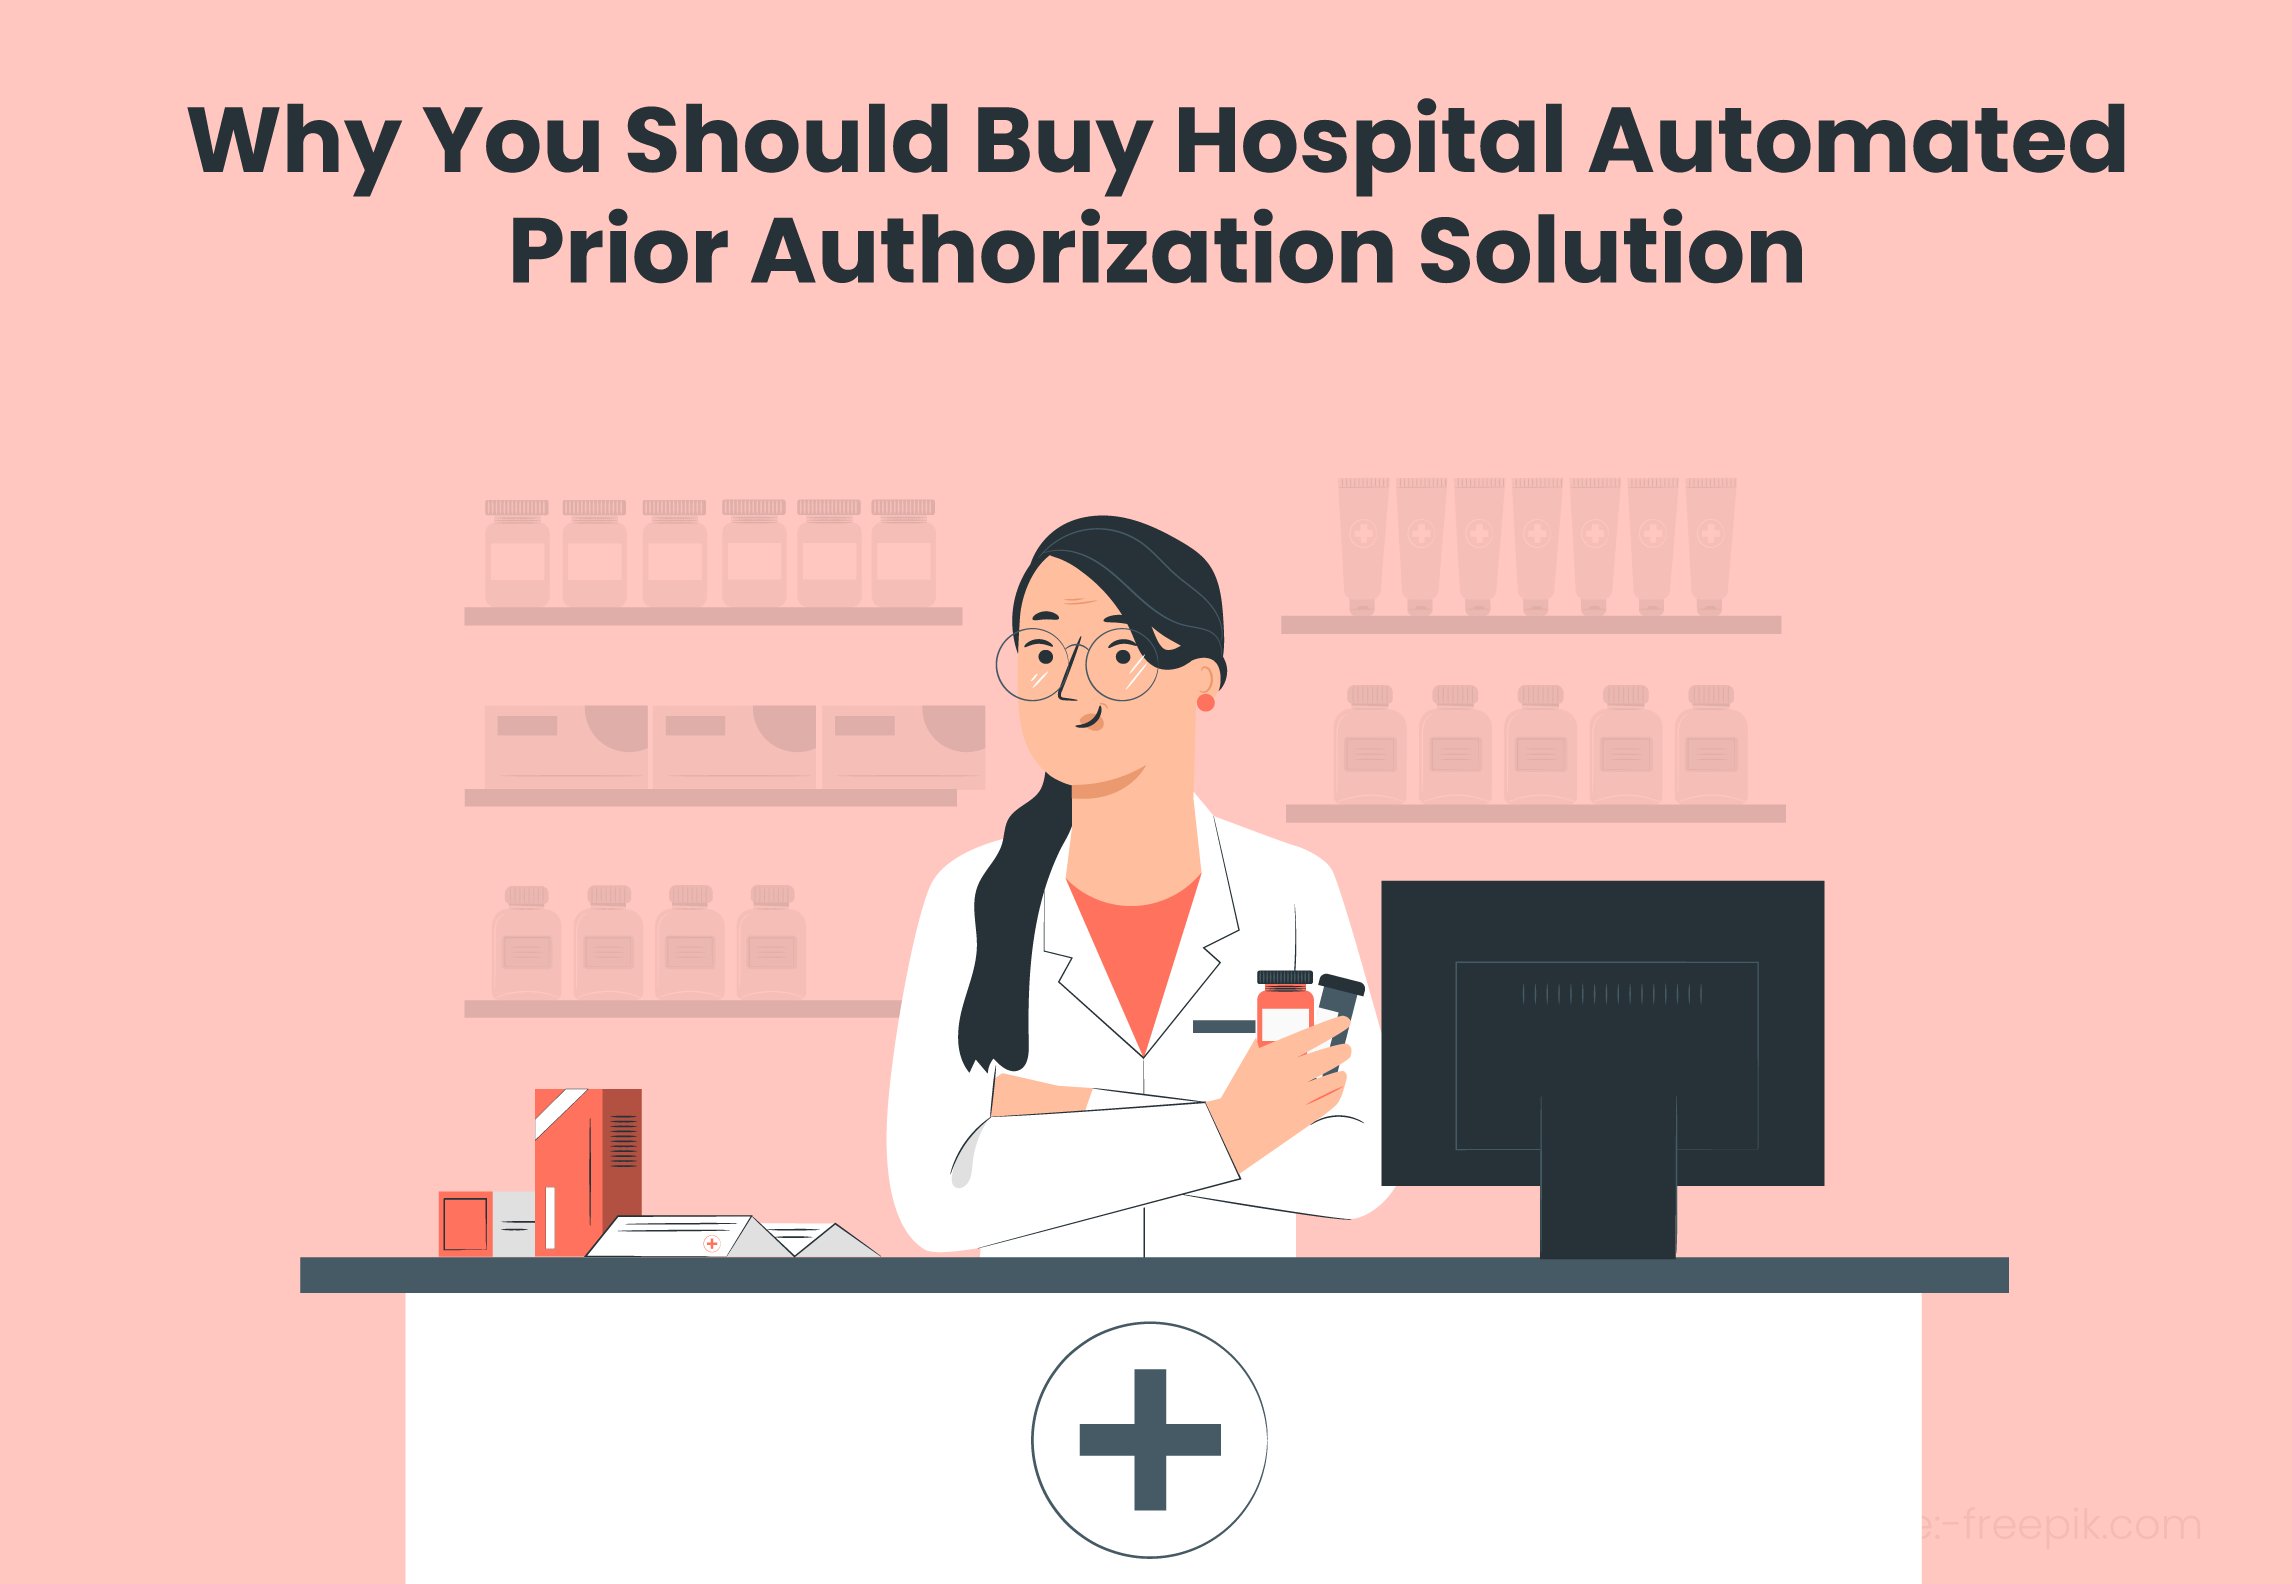 Buy Hospital Automated Prior Authorization Solution